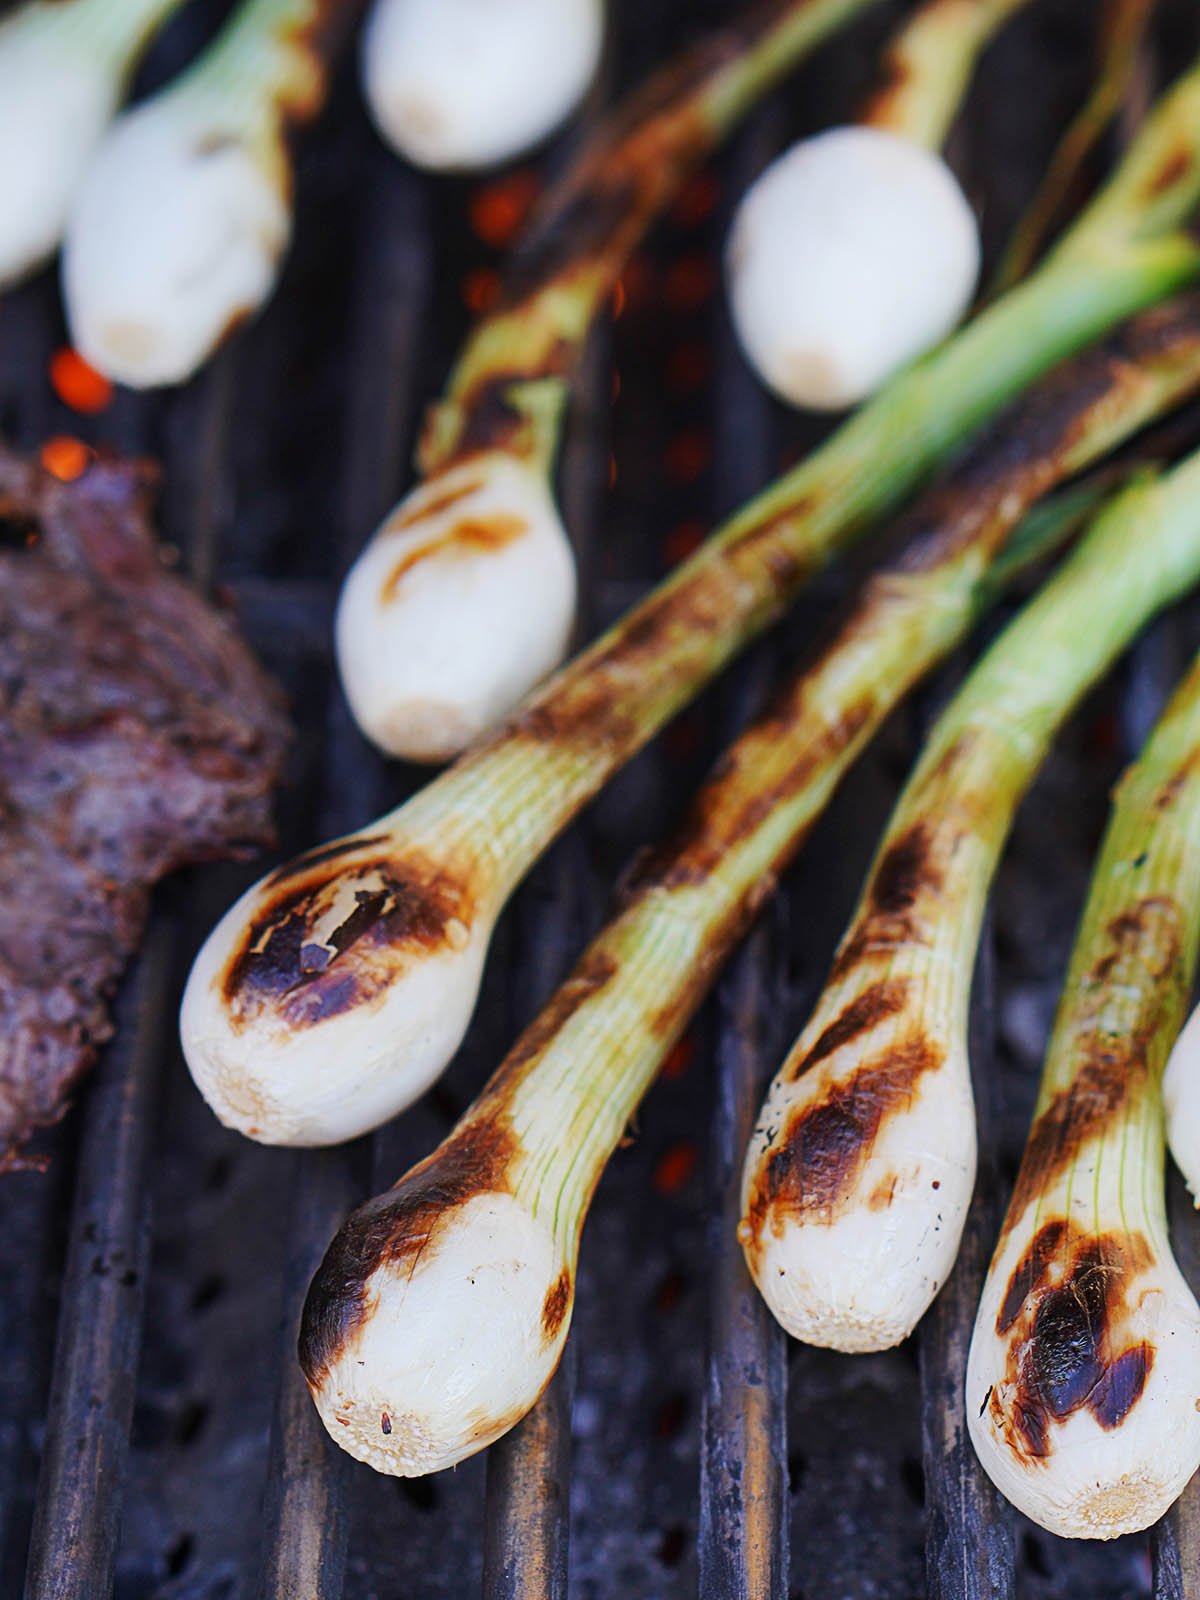 Cebollitas on a grill with carne asada on the side.